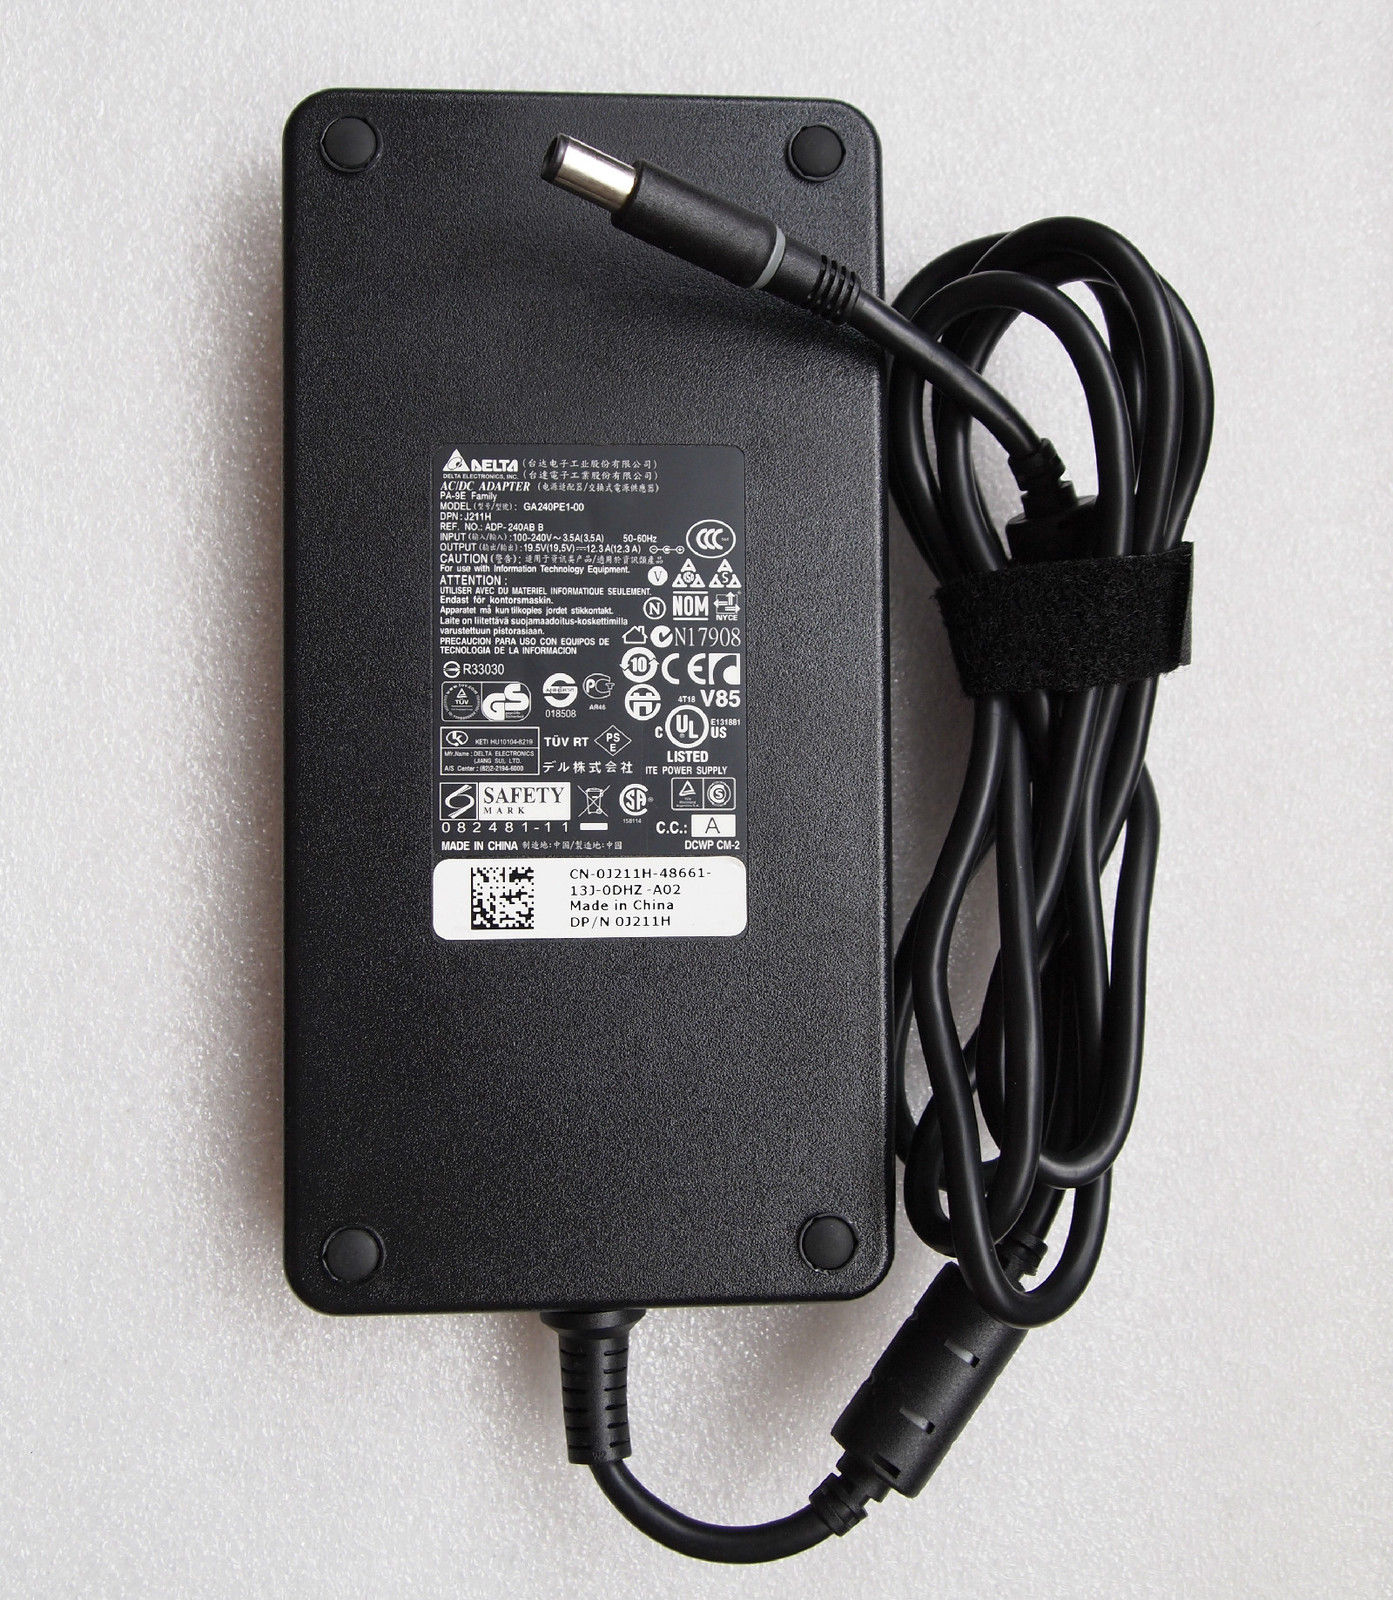 240W Dell Precision M6600 Mobile Workstation AC Adapter Power - Click Image to Close